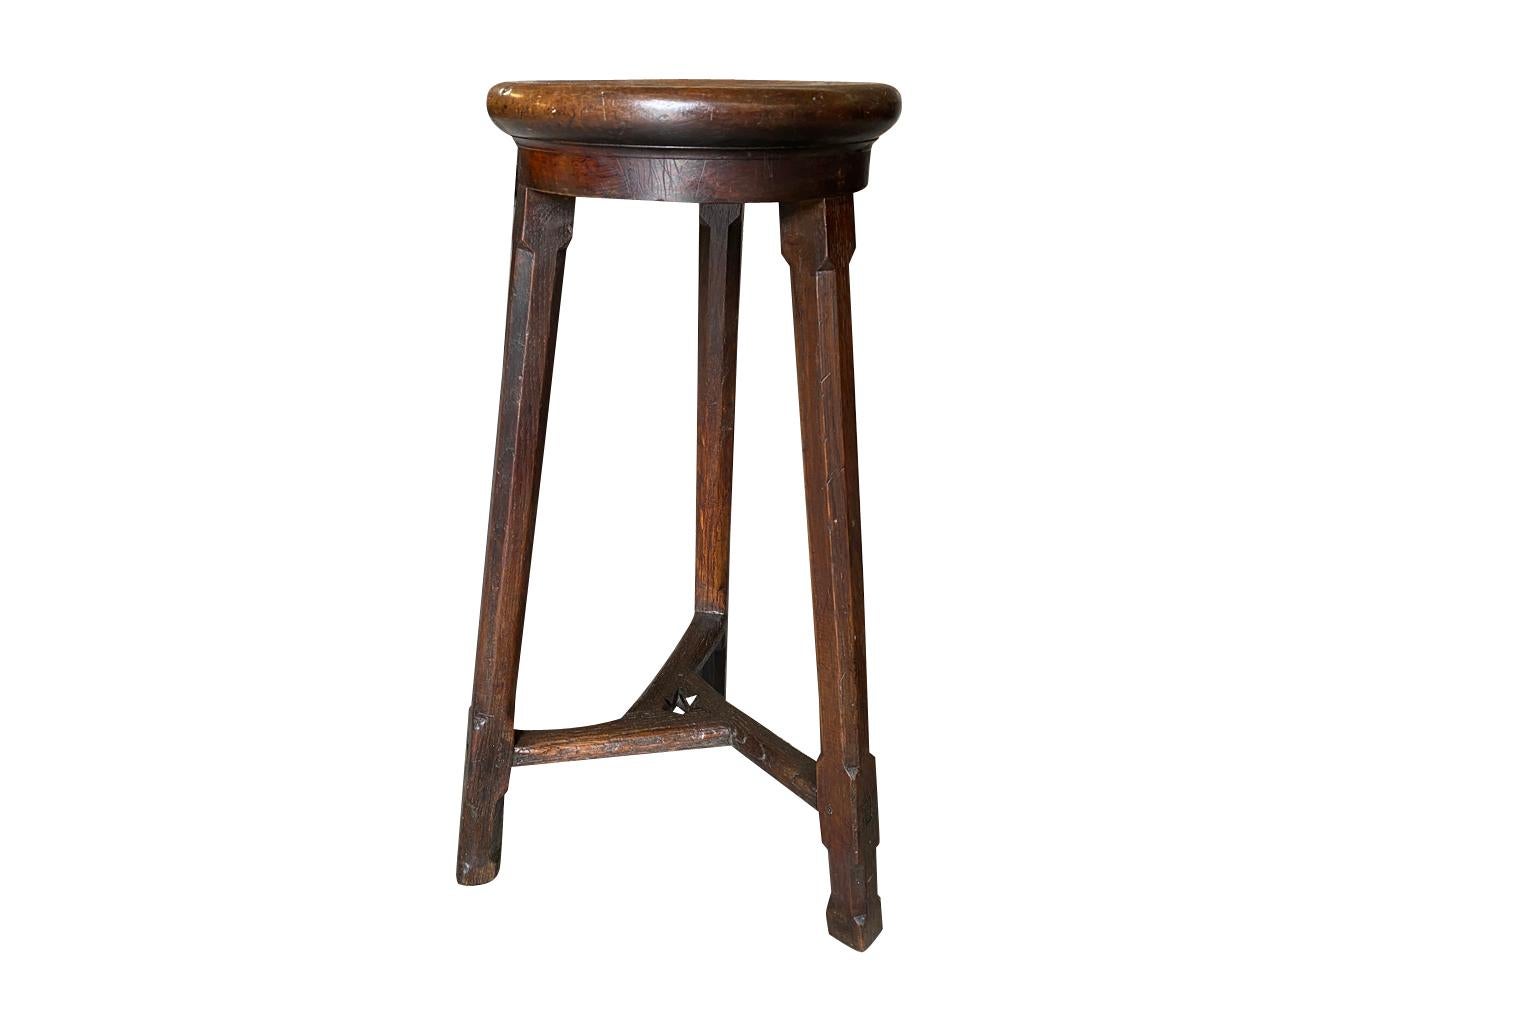 A very charming 19th century Work Stool from the Provence region in France. Sturdily constructed from walnut & chestnut with three legs and a handsome rounded edge finish to the seat. Great patina. The seat diameter is 12 1/2